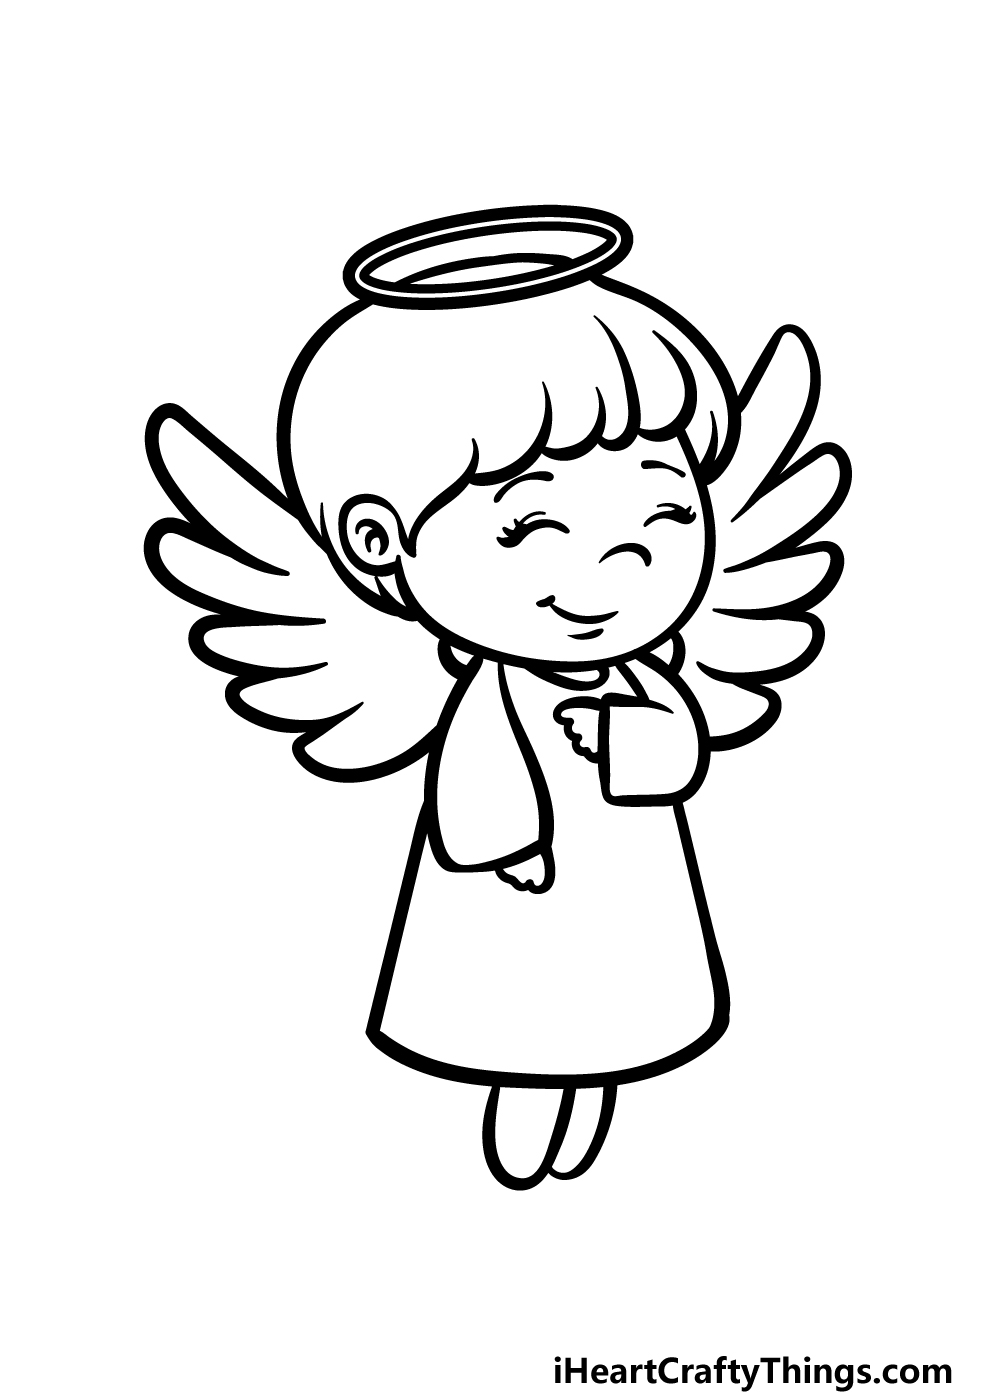 Tutorials on how to draw an angel (face, wings, body)